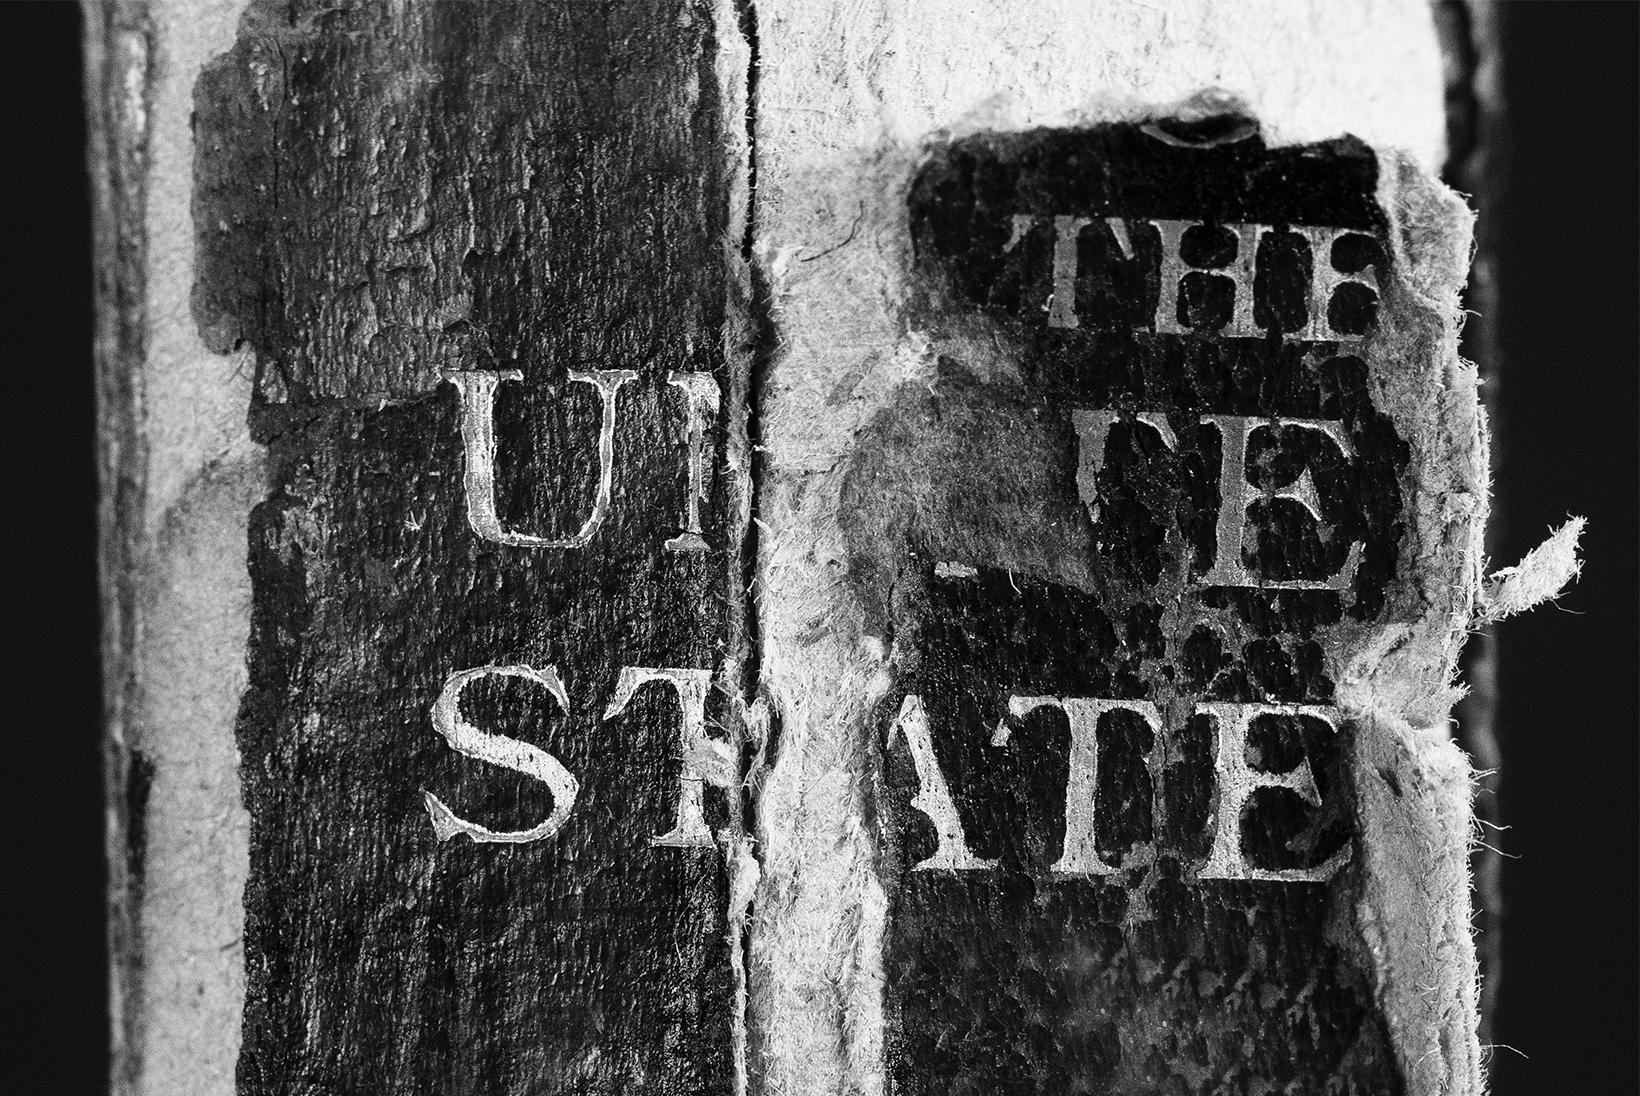 A close-up of an old book’s spine. The material is disintegrating, but the words “The United States” are still legible.